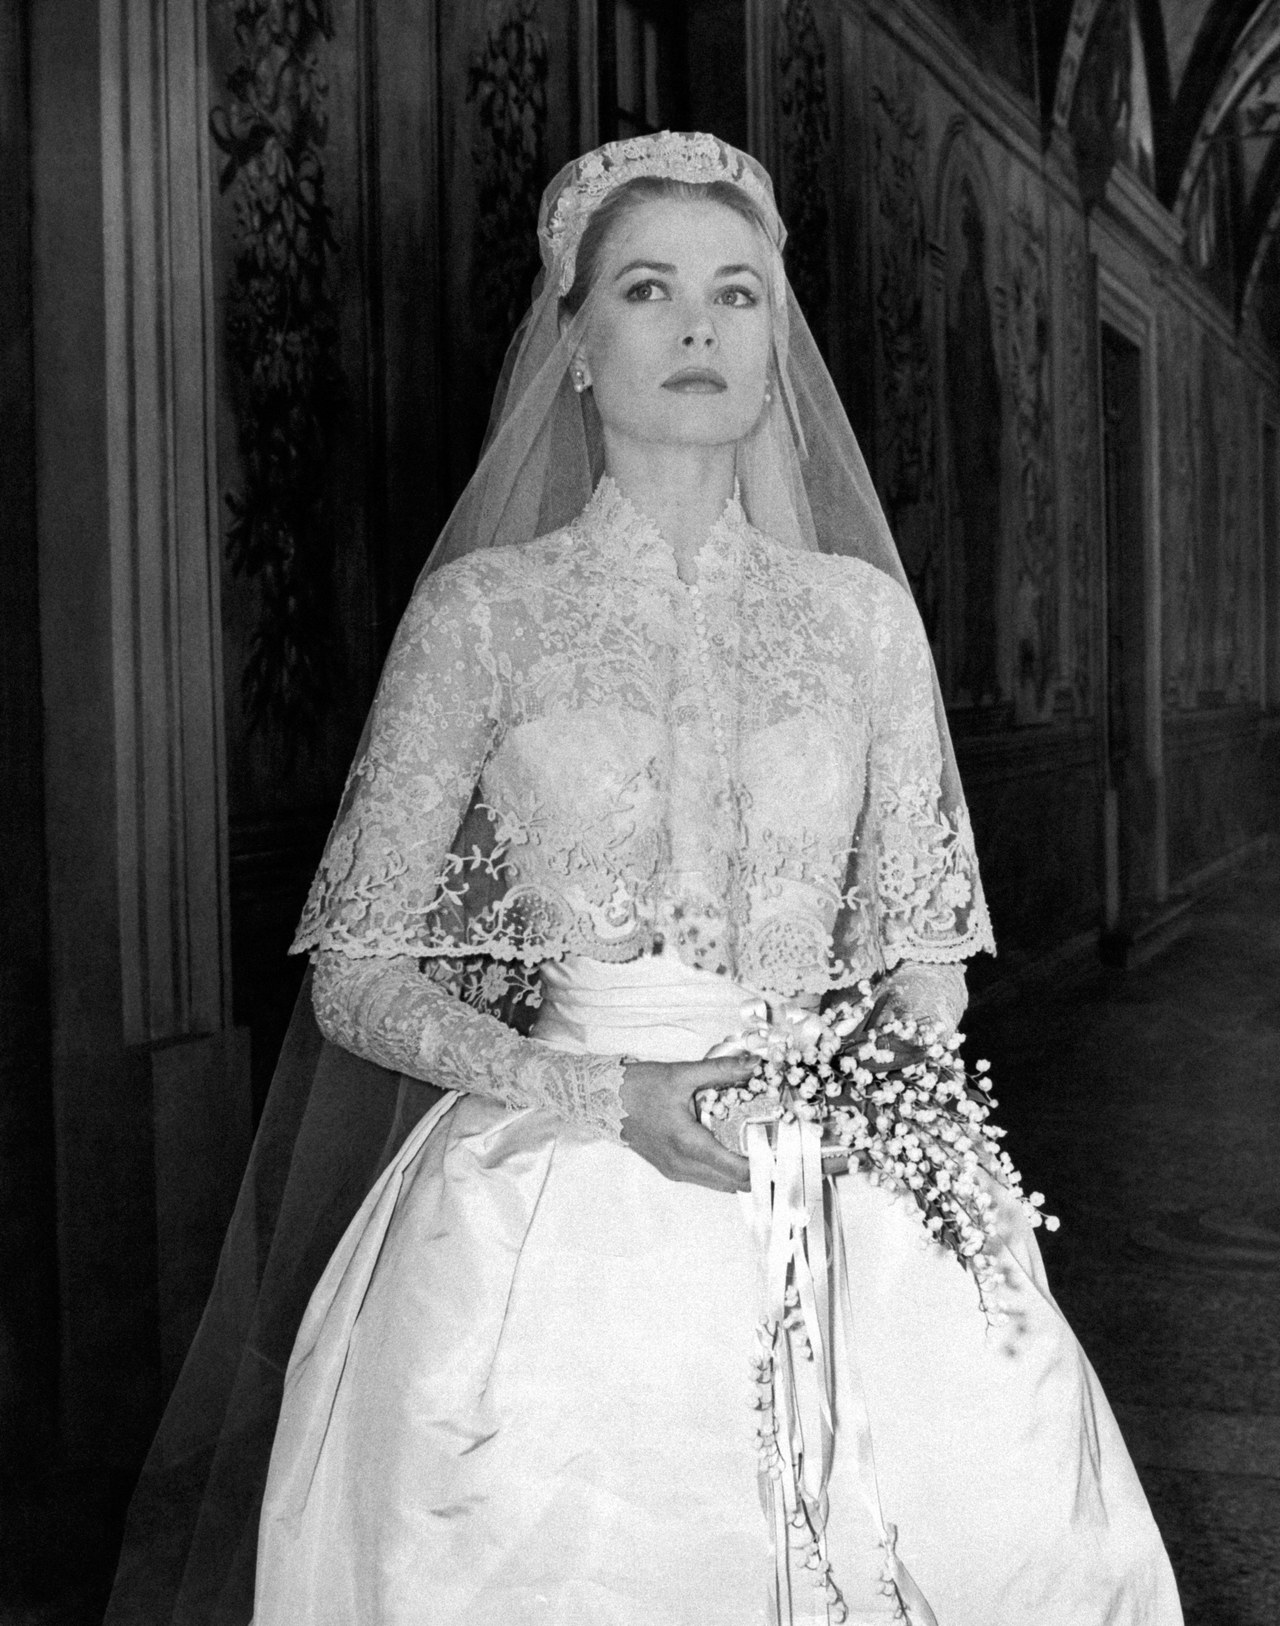 Das big movie star Grace Kelly photographed in her bridal dress in a frescoed gallery within the Prince's Palace, just before the wedding ceremony where she will marry Ranier III of Monaco, becoming princess of the Principality. Monaco, April 18th, 1956. (1704904) Everett Collection\Mondadori Portfolio